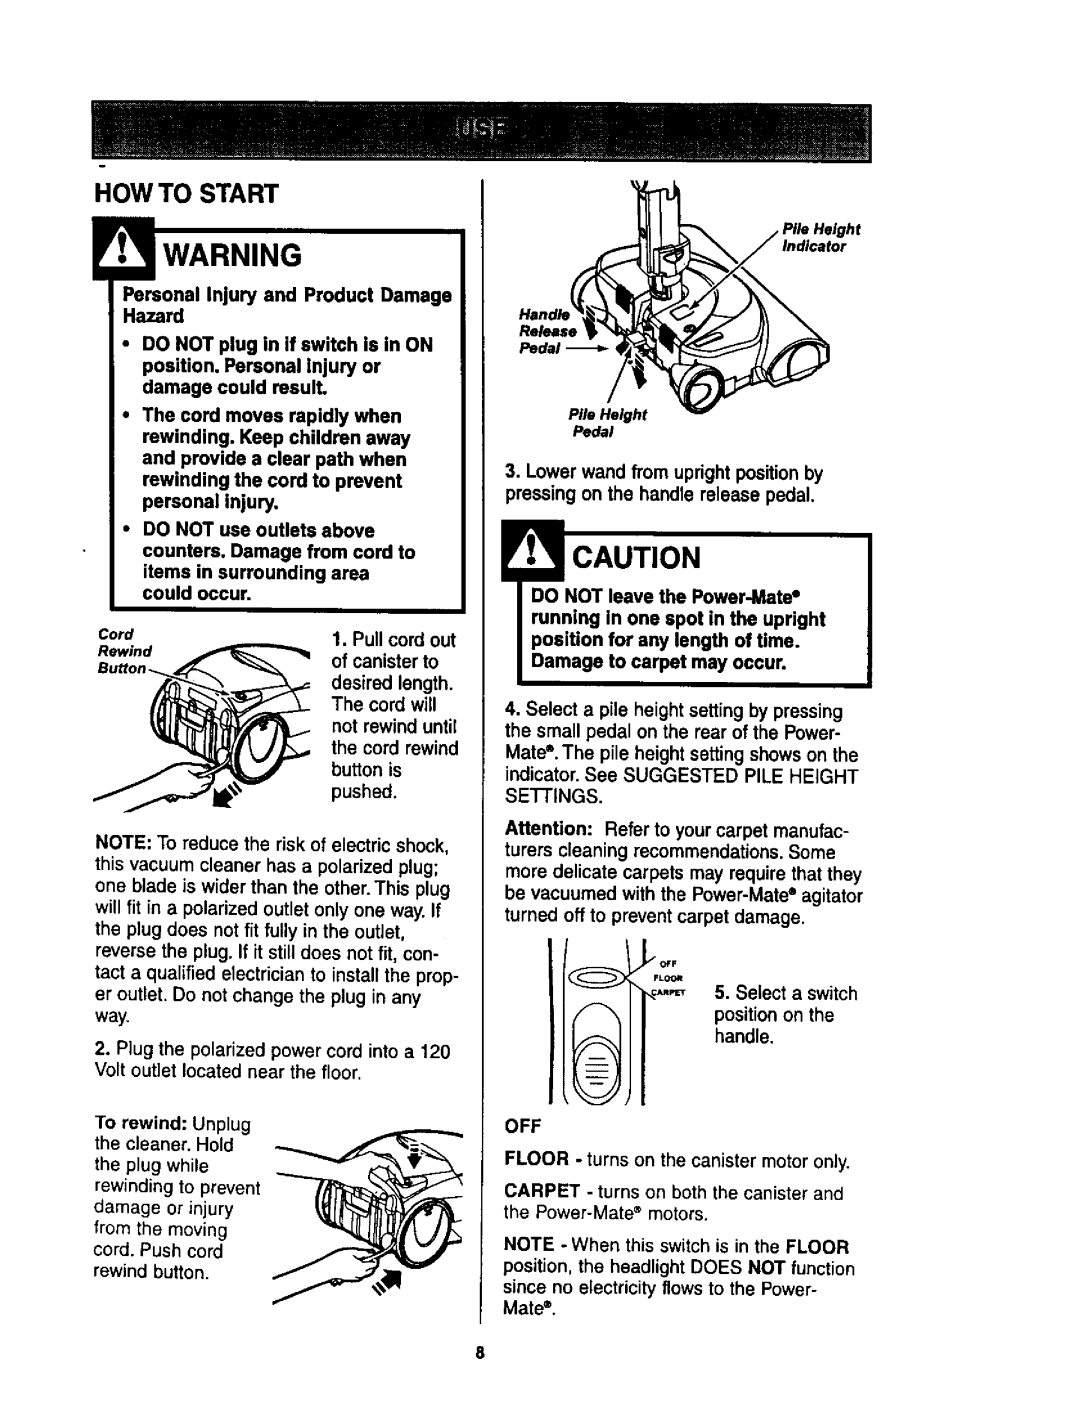 Kenmore 614, 624 owner manual How To Start, esired length 